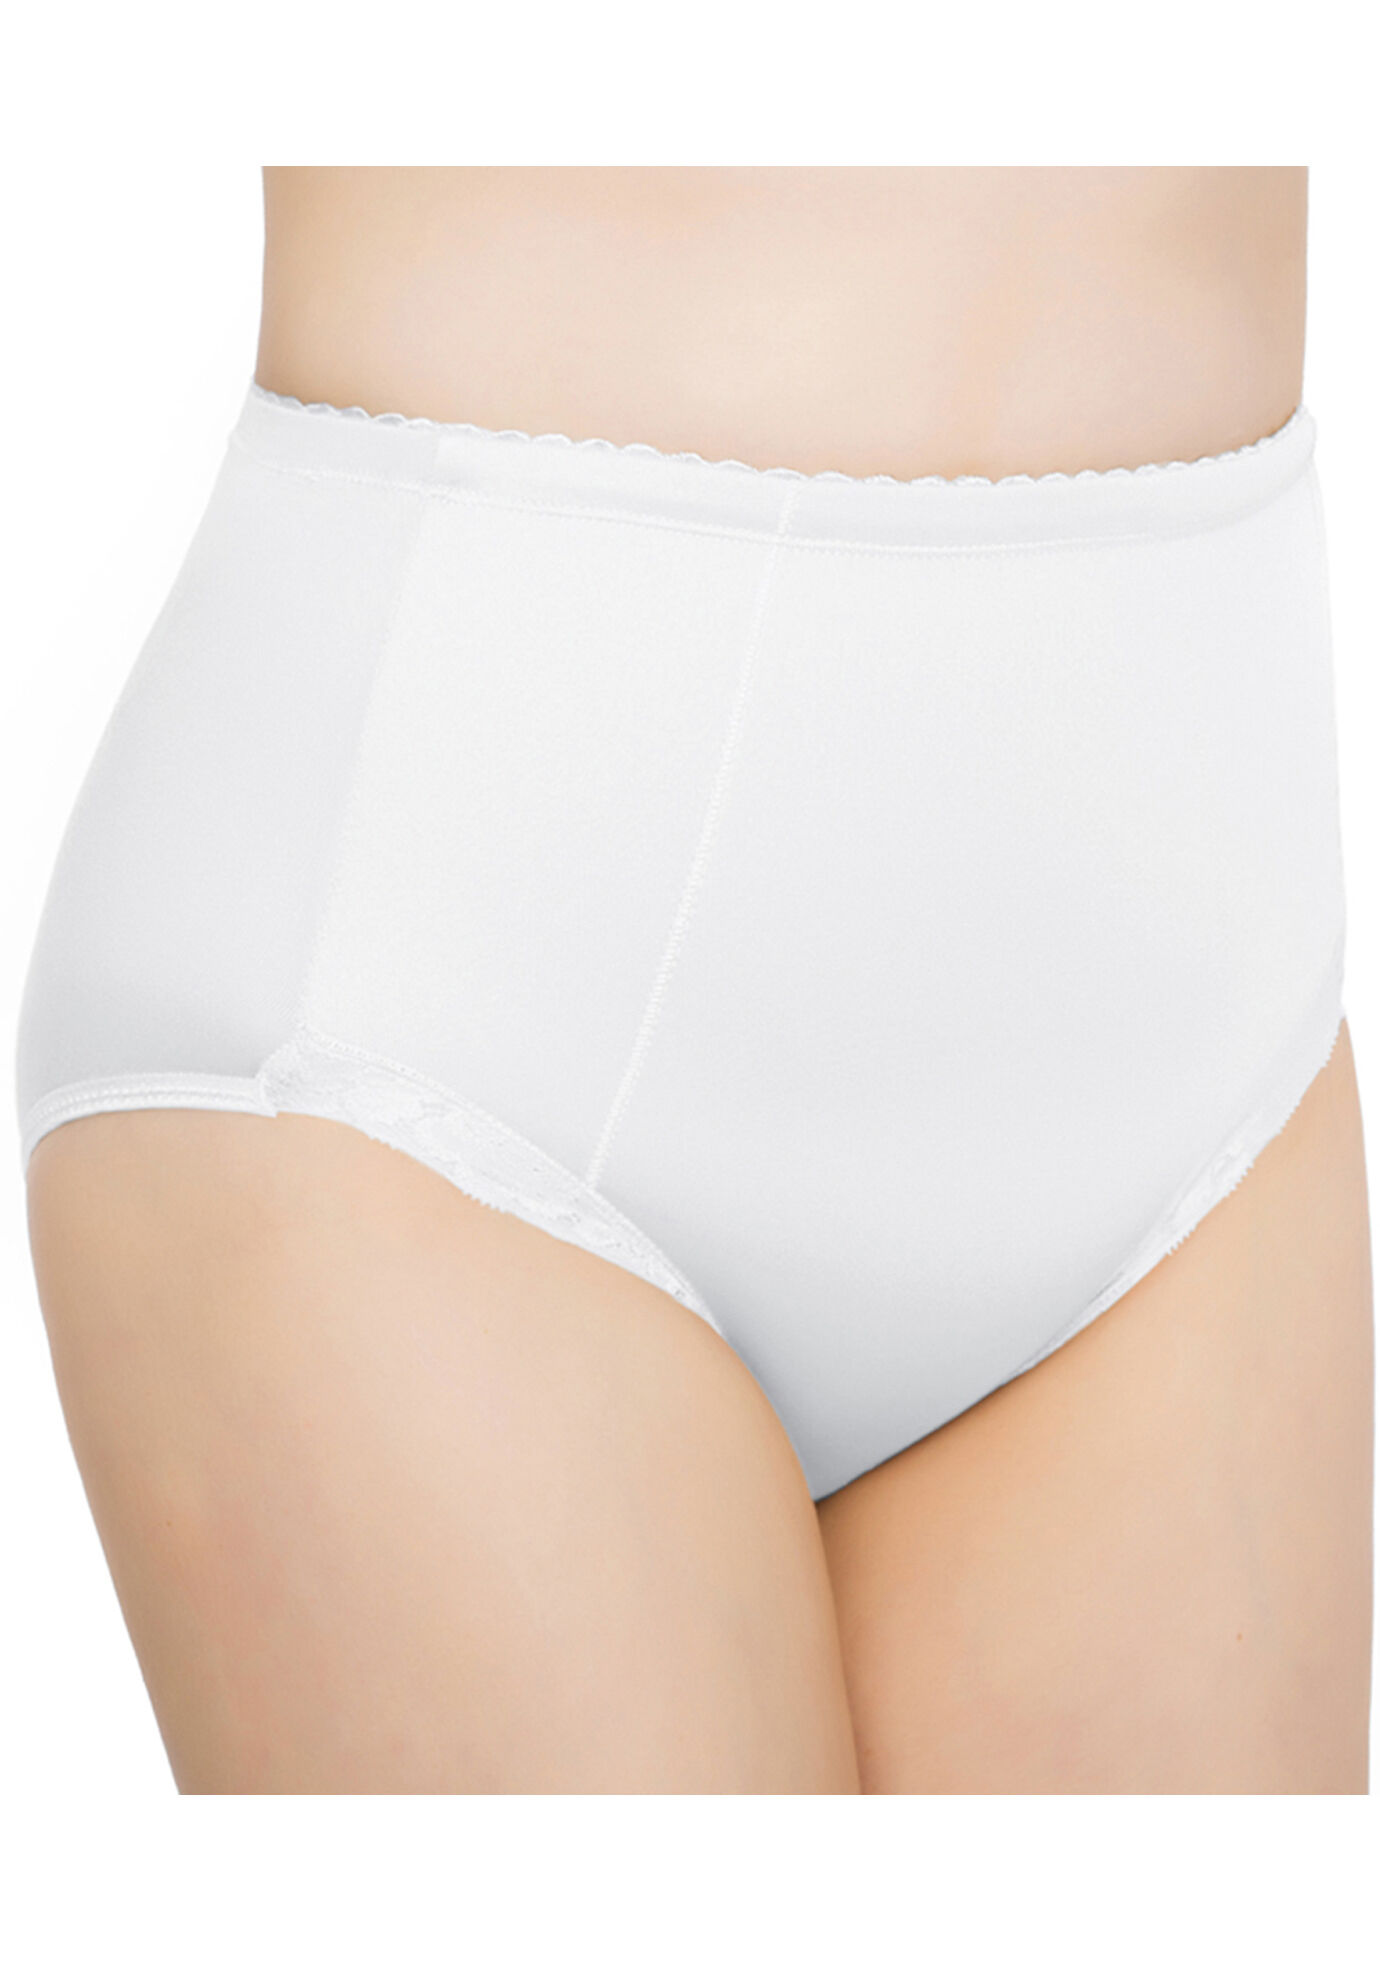 Plus Size Women's Exquisite Form®2-Pack Control Top Lace Shaping Panties by Exquisite Form in White (Size 5XL)